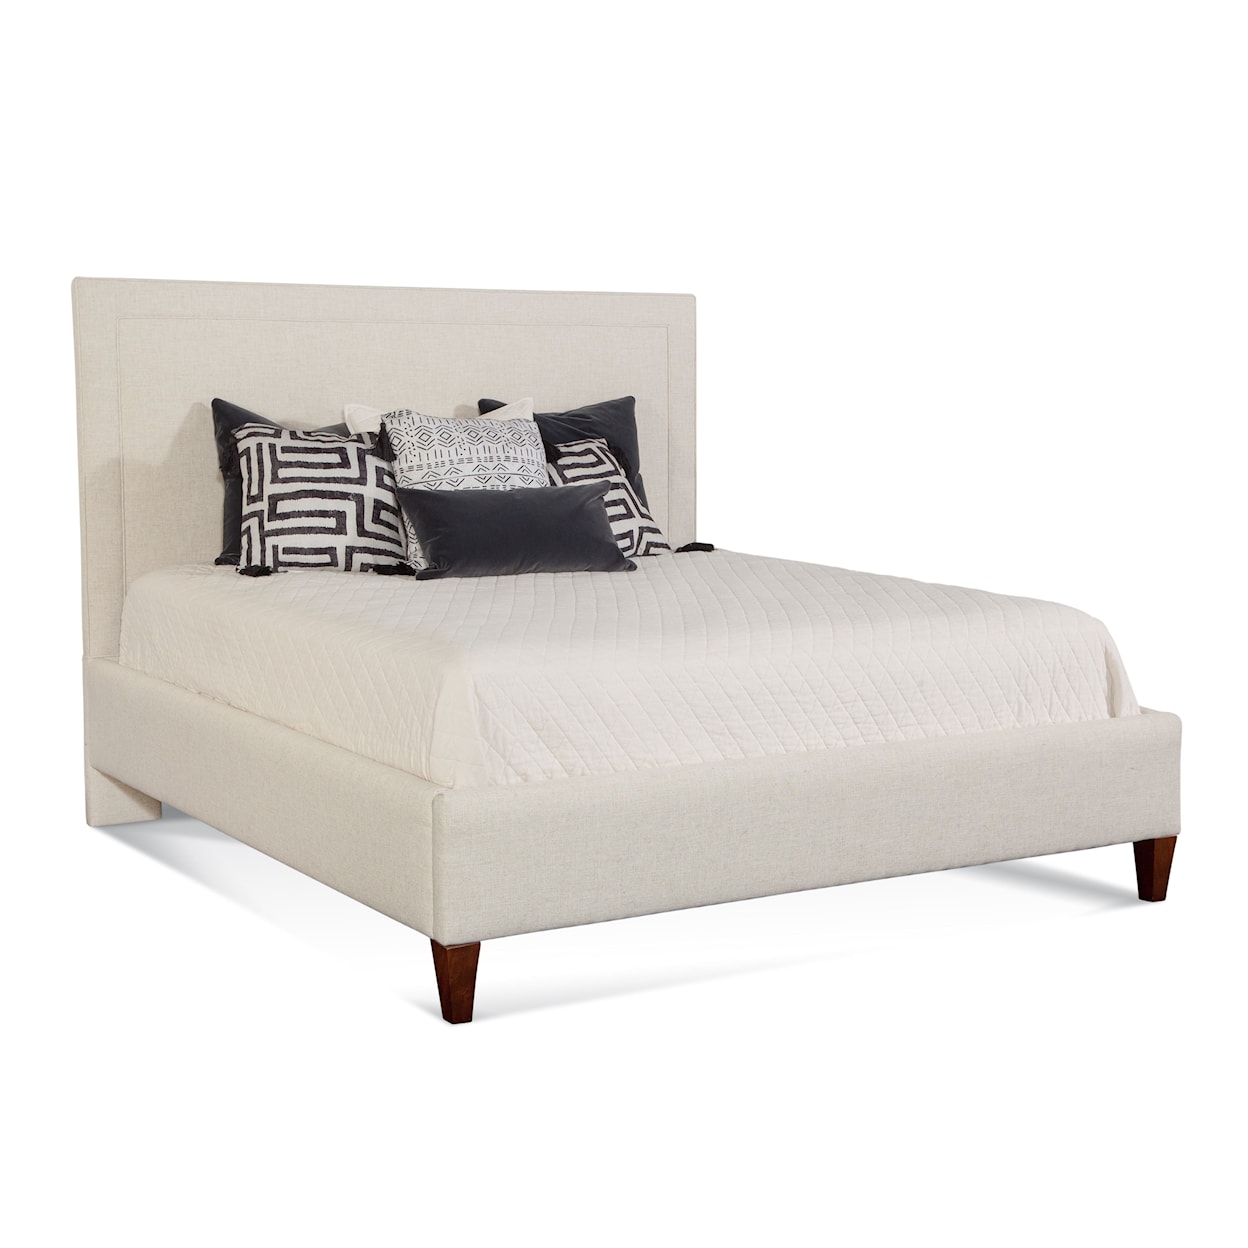 Braxton Culler Emory King Bed with Nailhead Trim